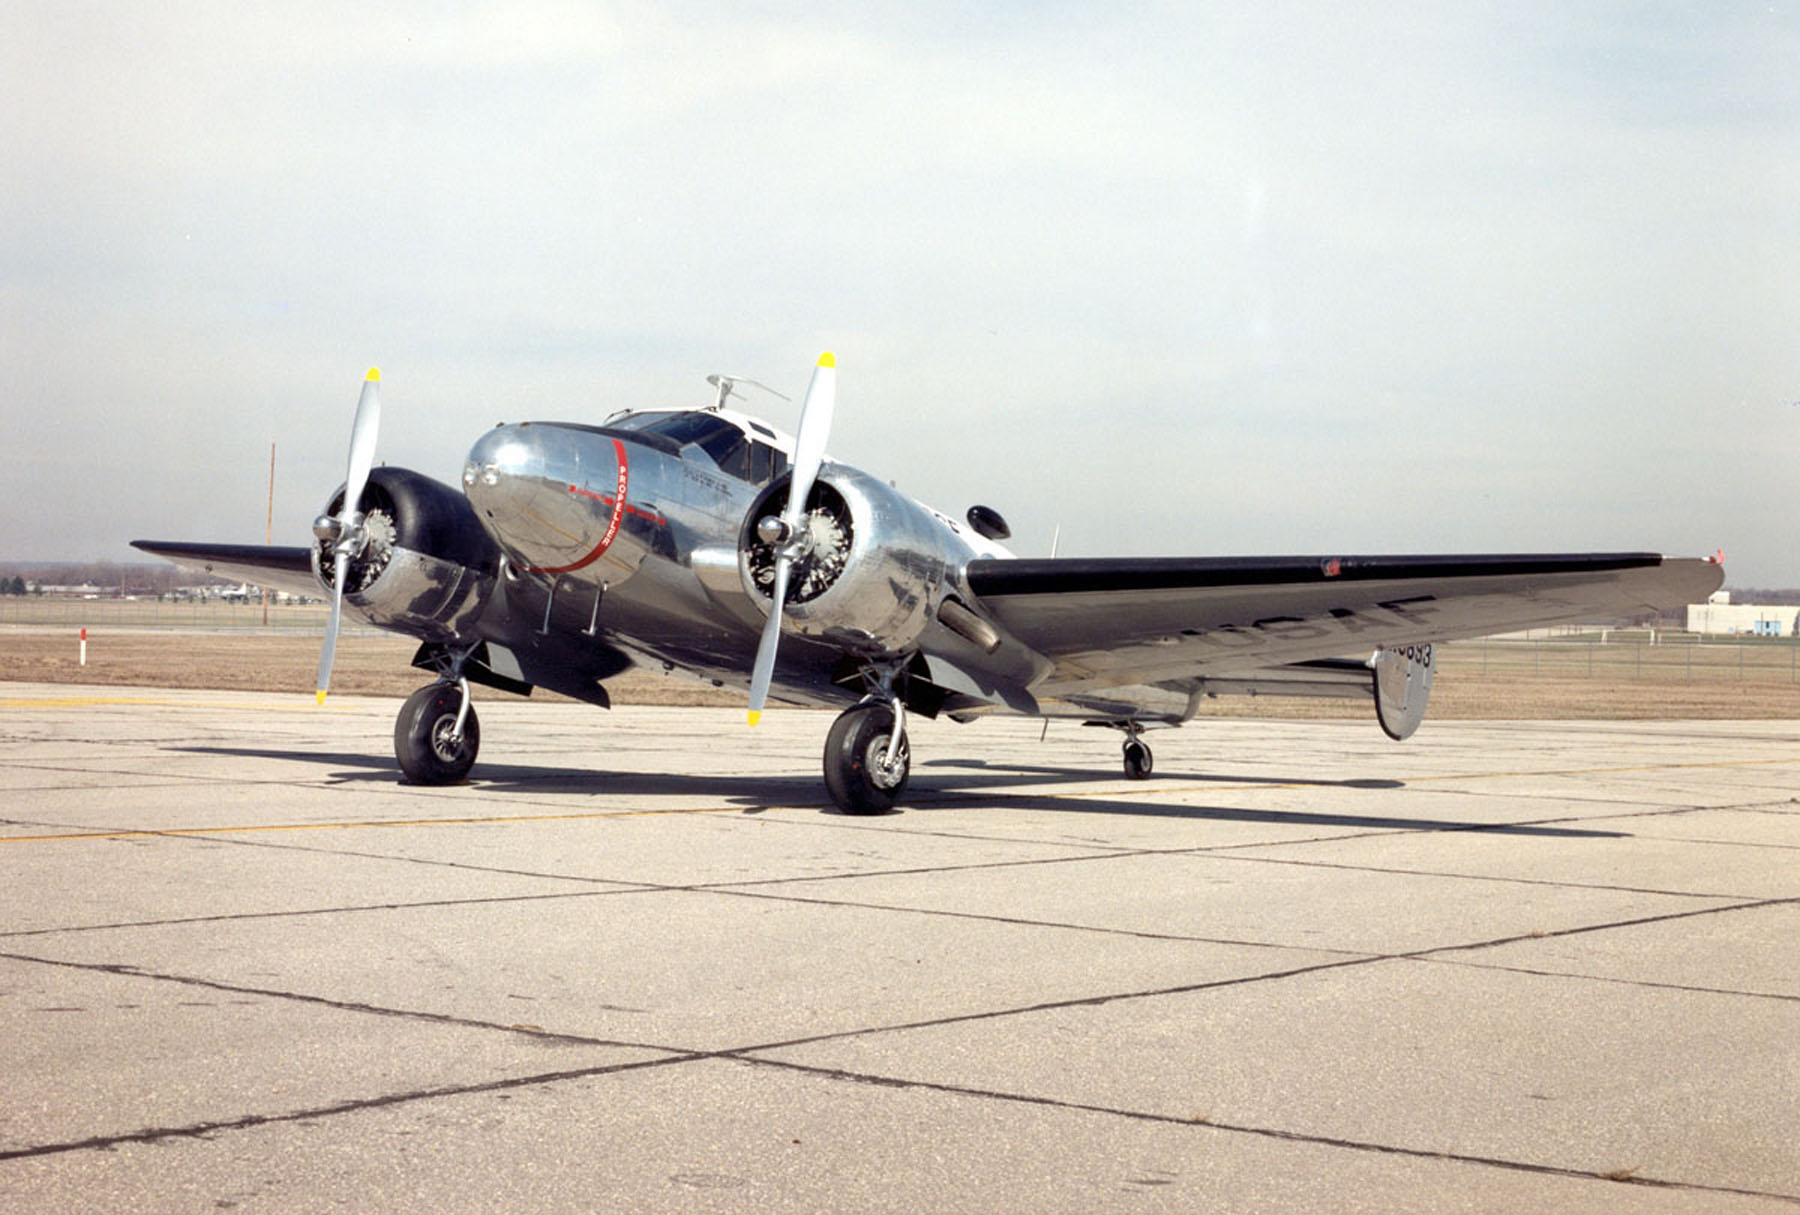 Beech 18, pictures, technical data, history - Barrie Aircraft Museum